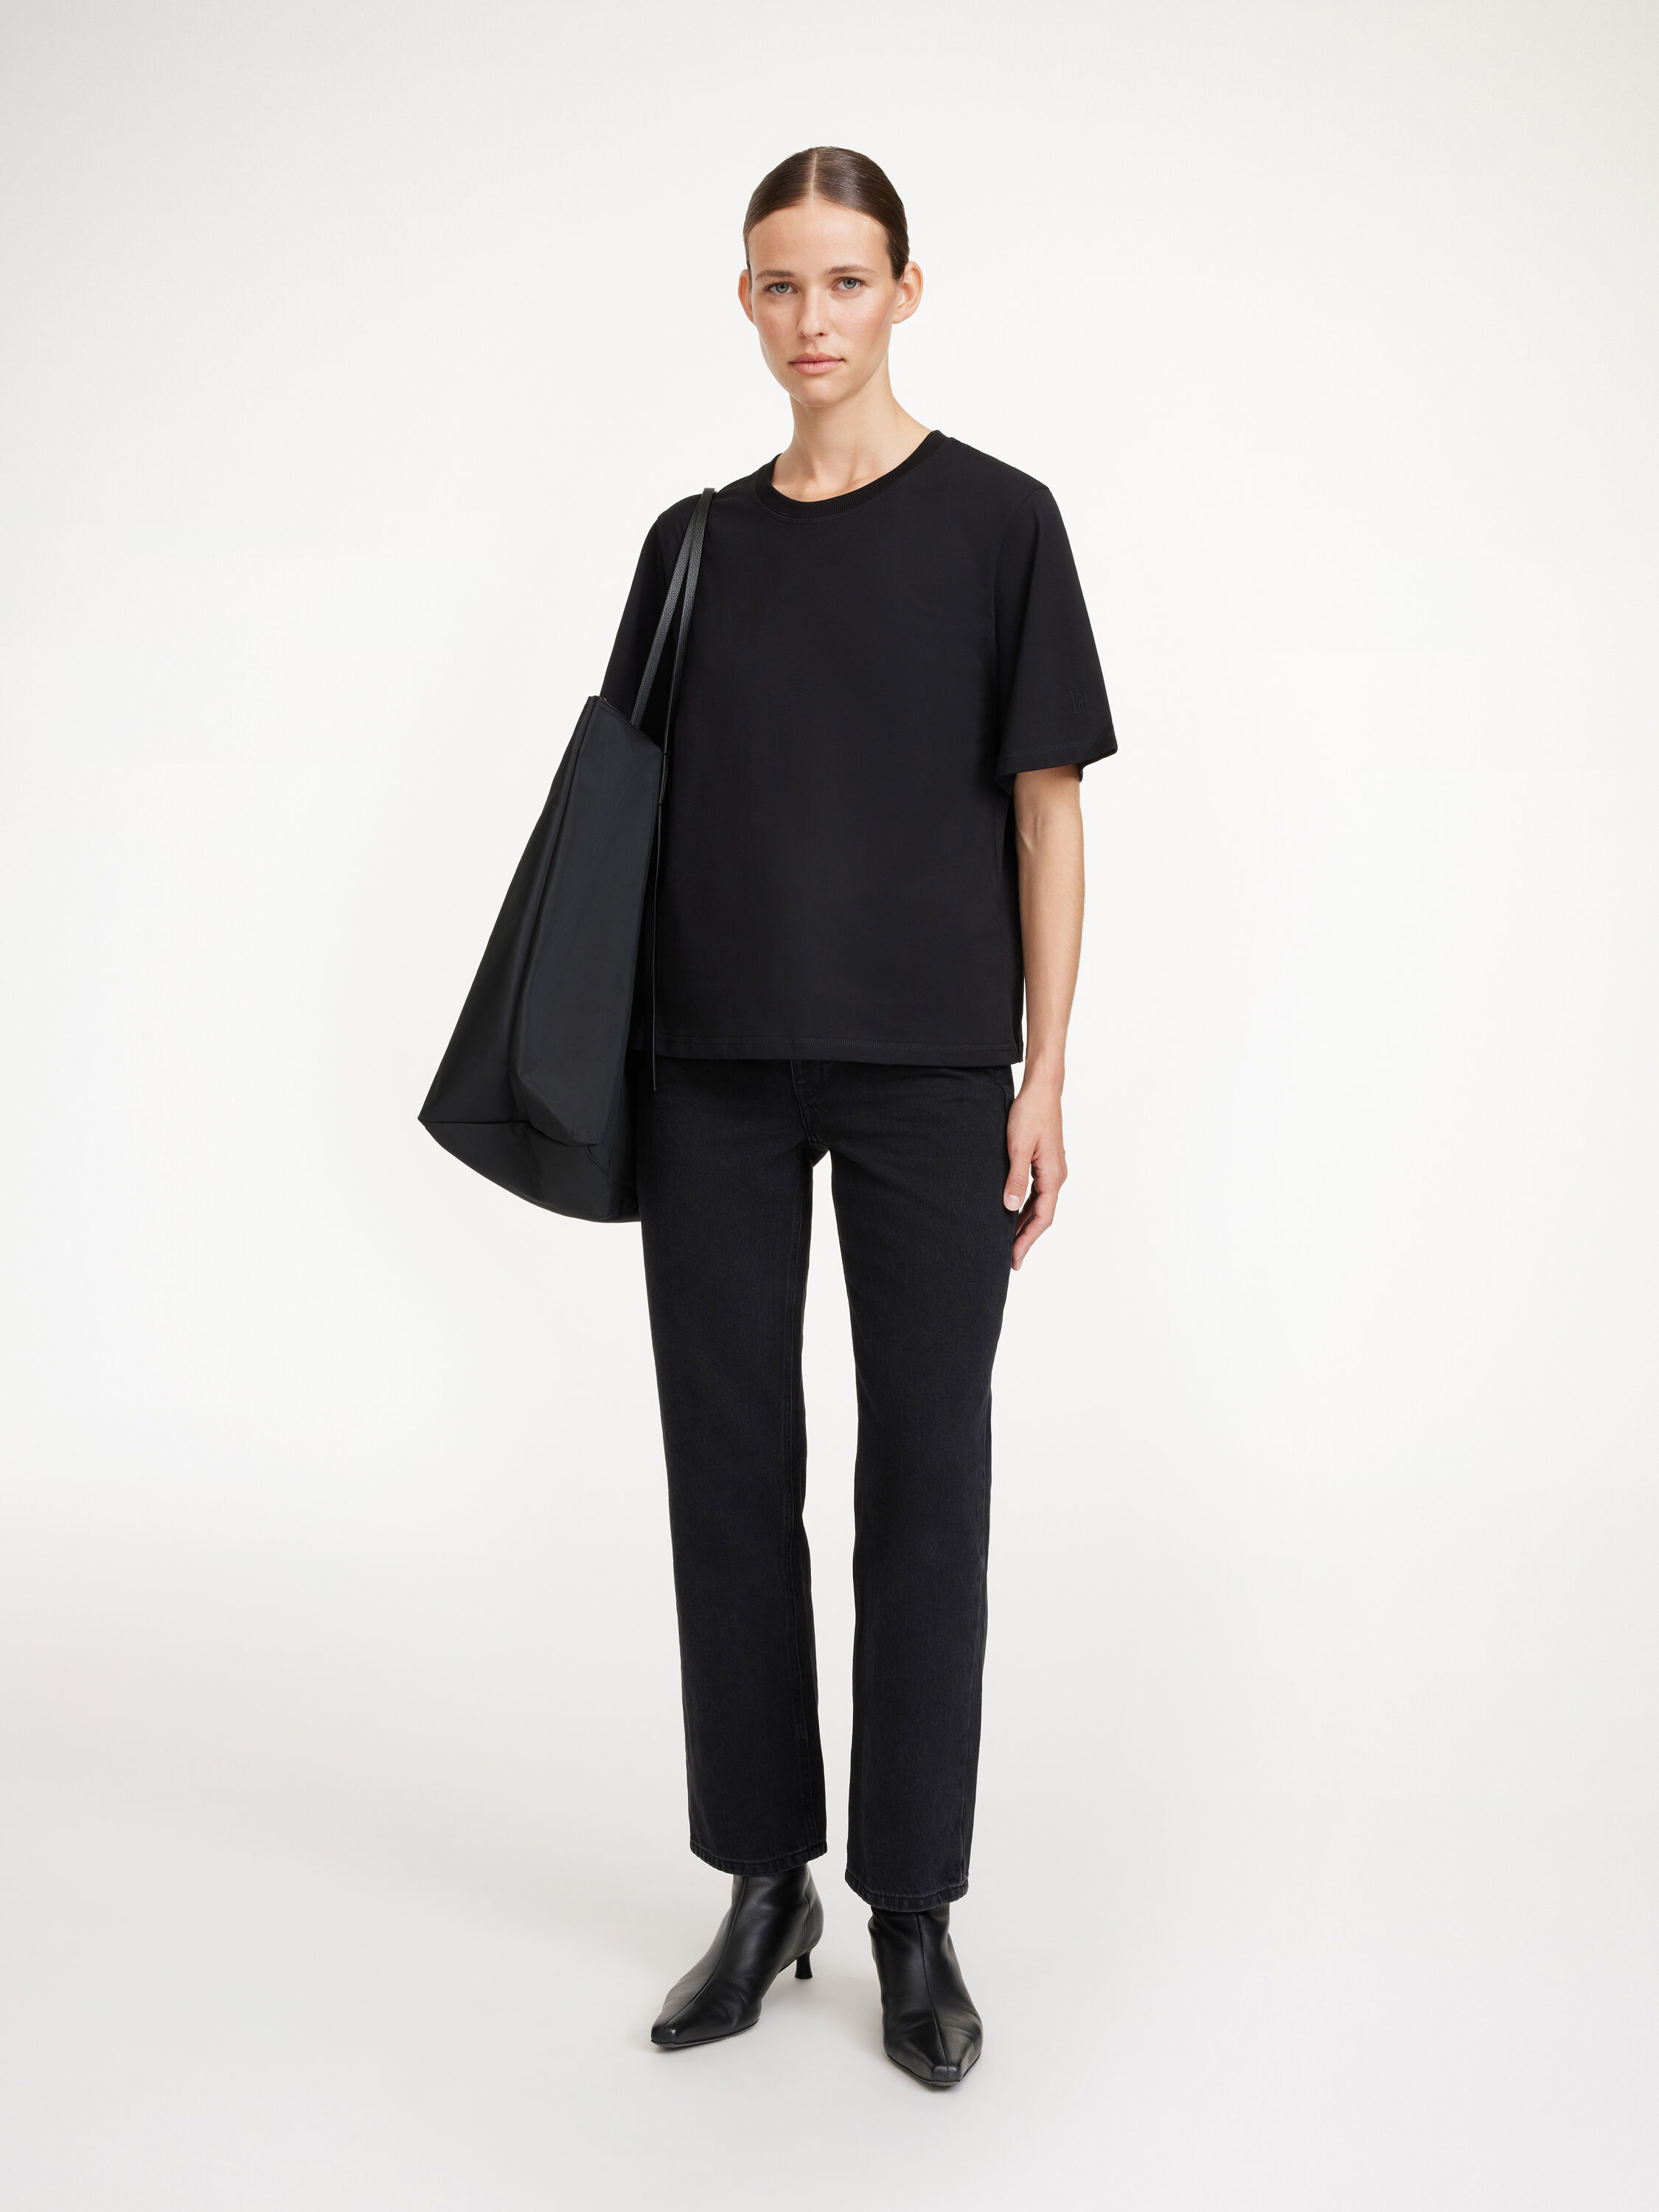 Tops | Explore all styles here | By Malene Birger